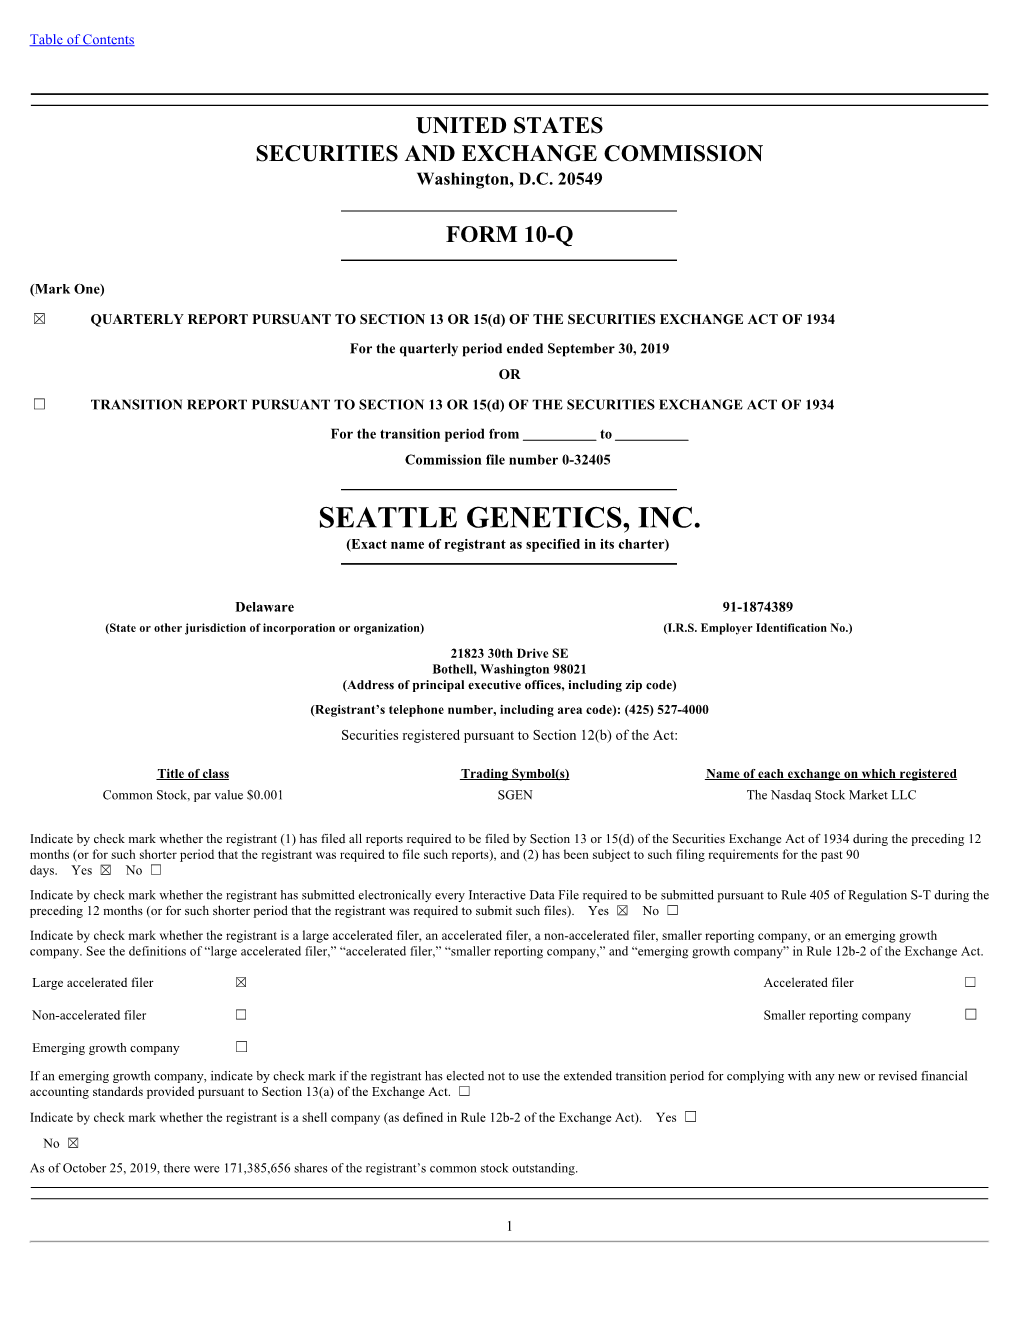 SEATTLE GENETICS, INC. (Exact Name of Registrant As Specified in Its Charter)